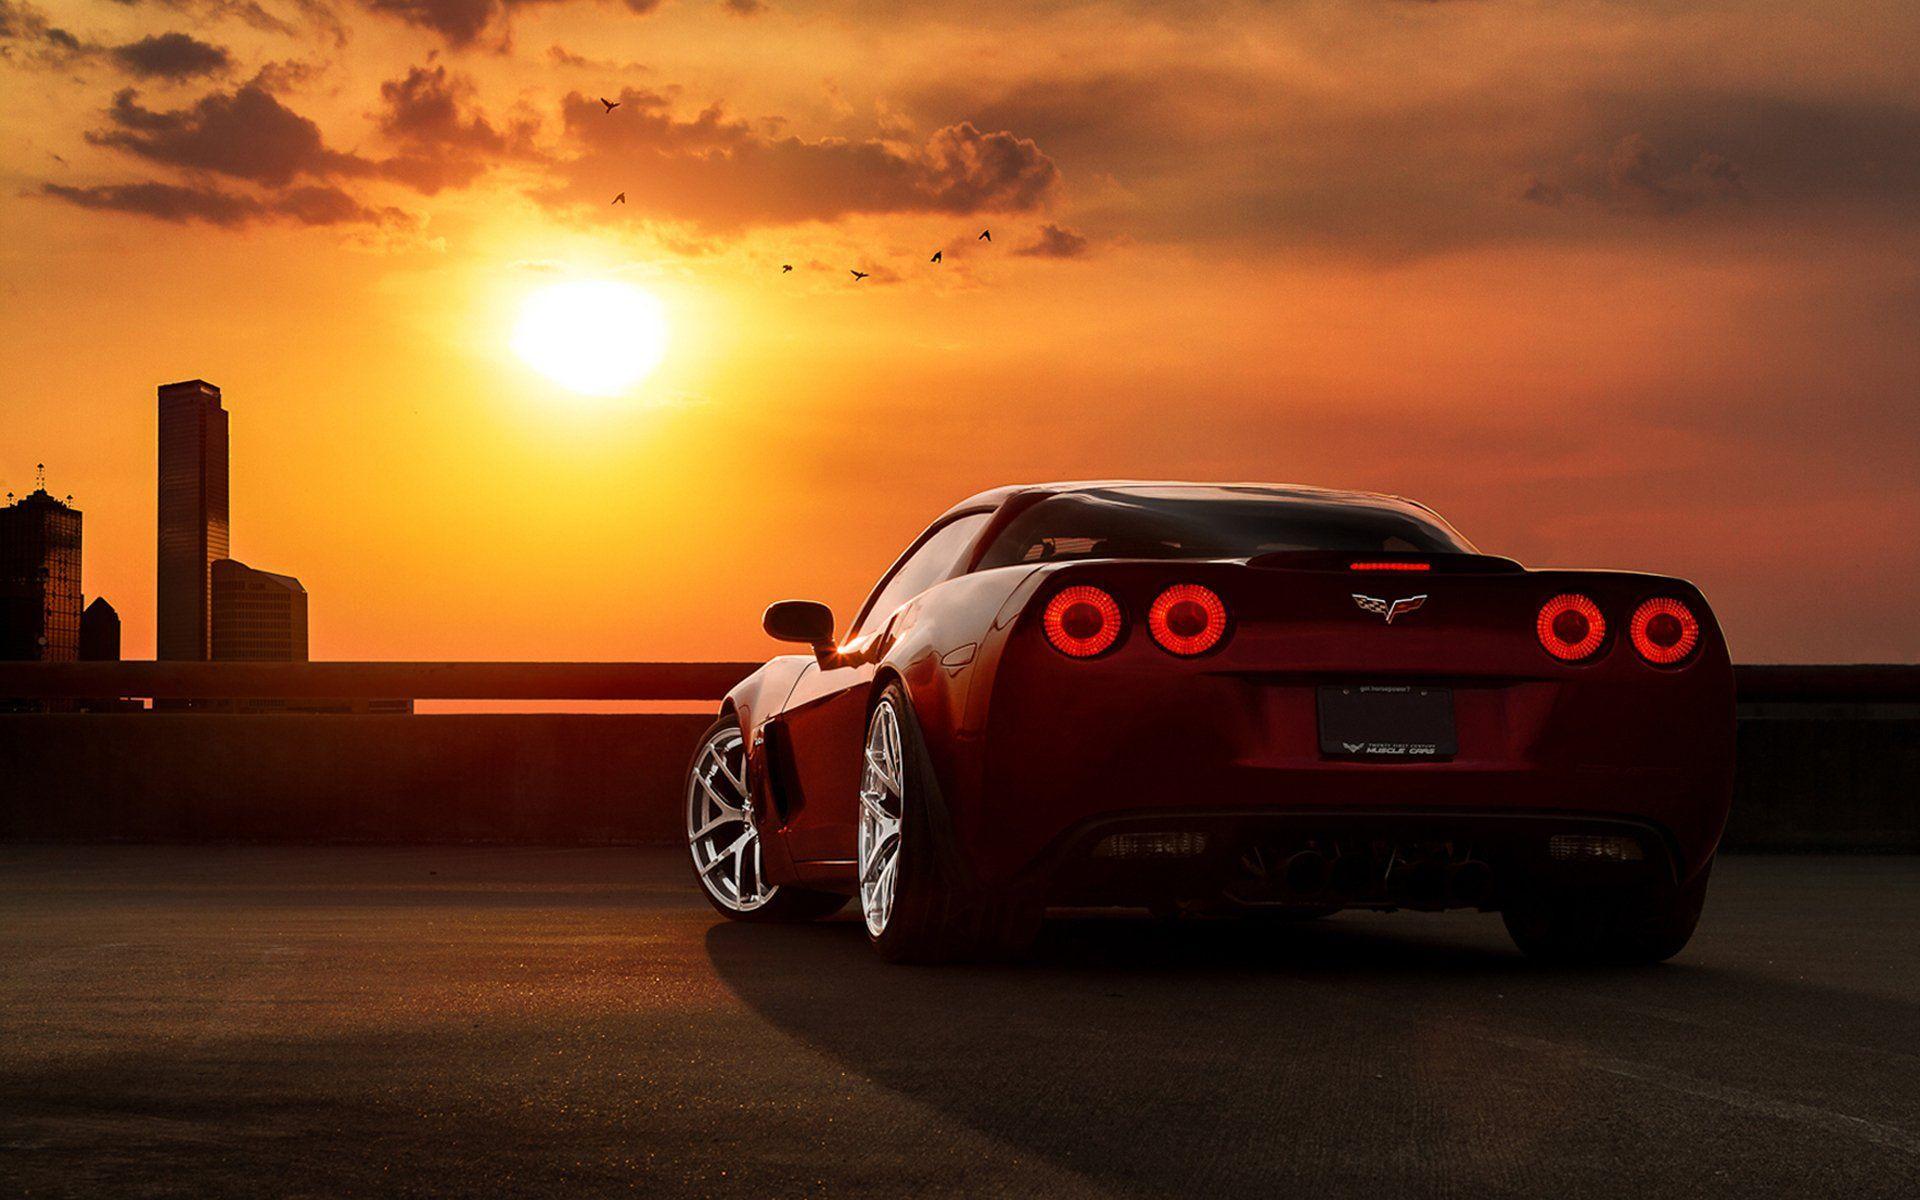 Chevrolet Sports Car Hd Wallpapers